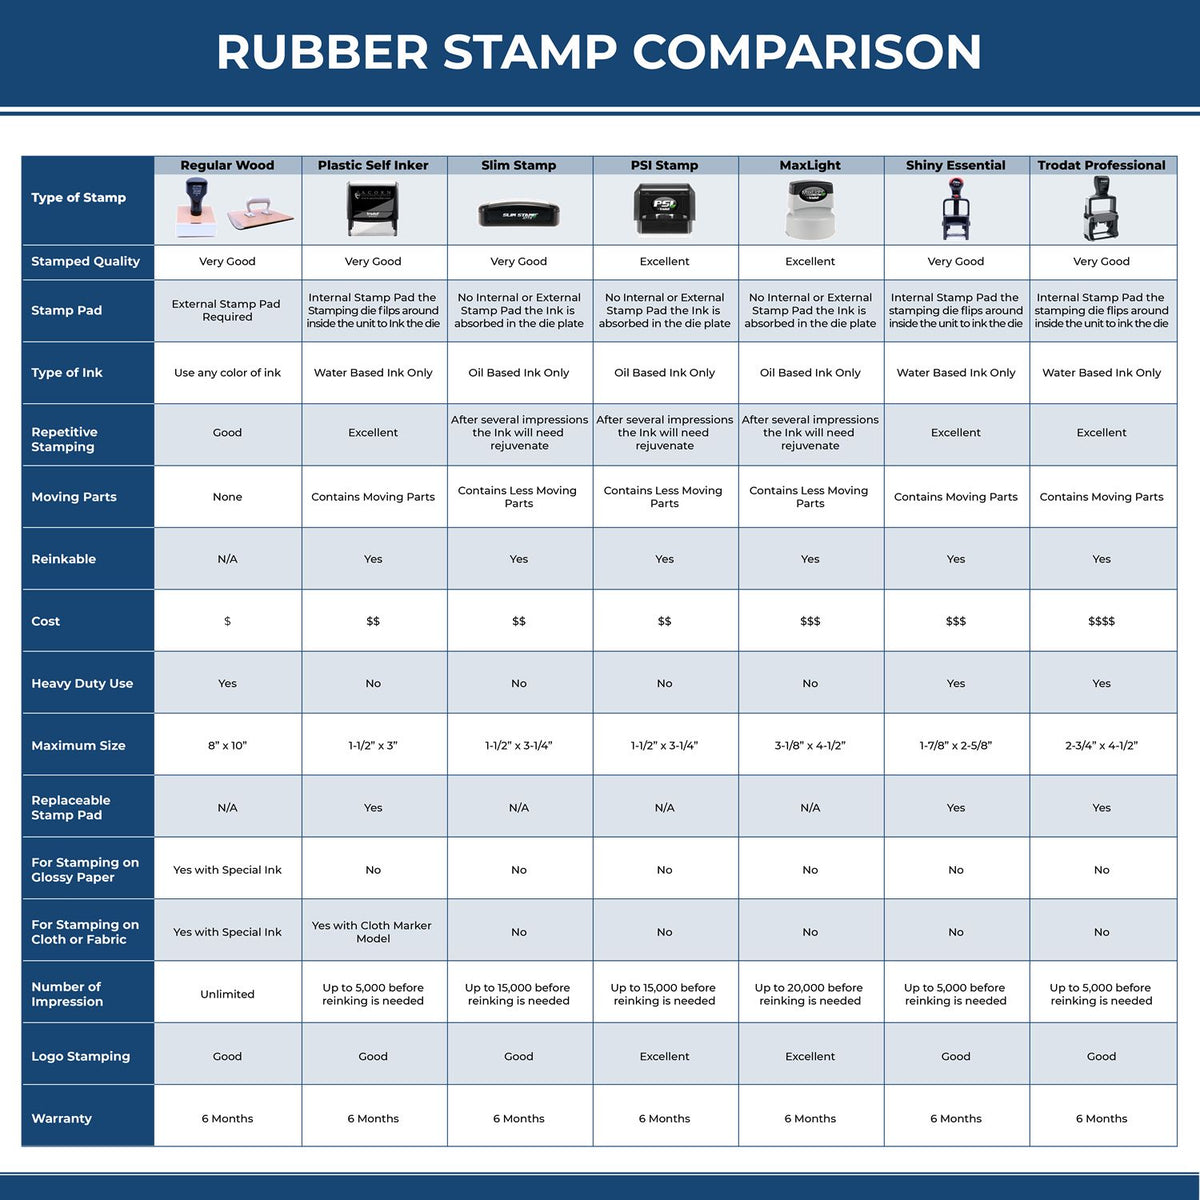 Large Self Inking Cash Stamp 4552S Rubber Stamp Comparison